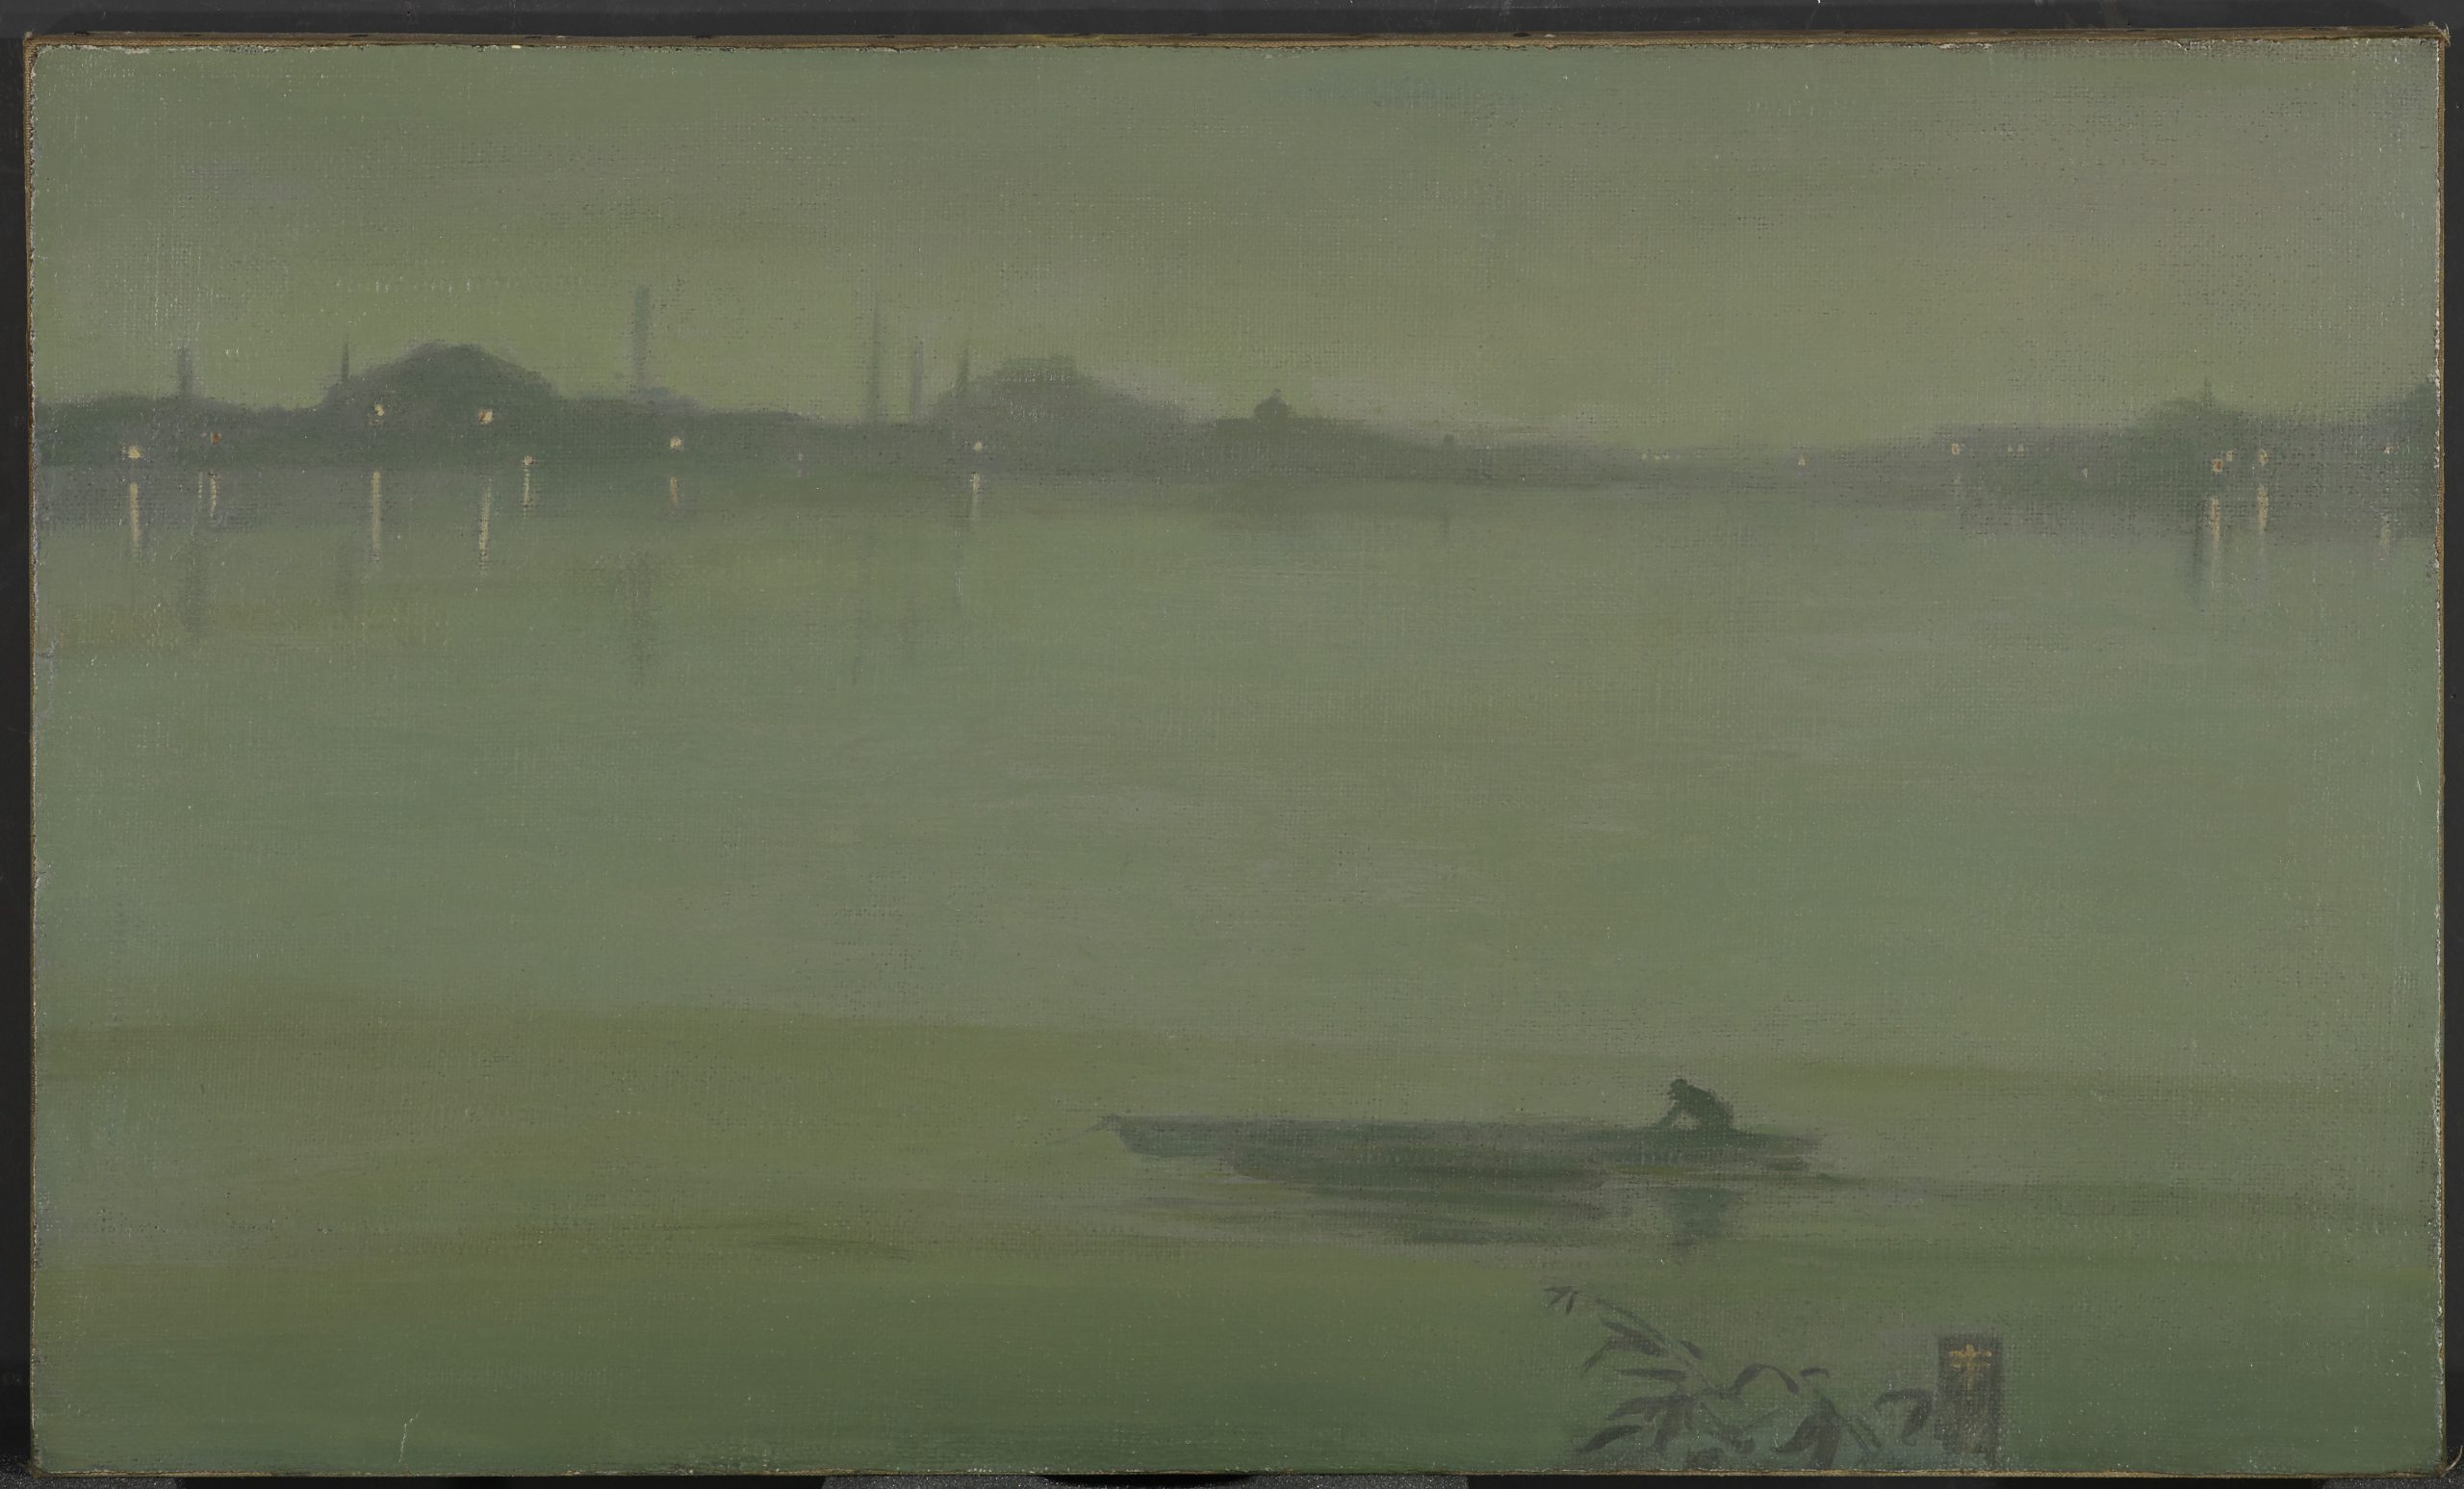 Oil painting of a distant shore silhouetted against a yellow-gray sky, with lights in the buildings reflecting off the water. In the foreground is a silhouette of a figure in a low rowboat.